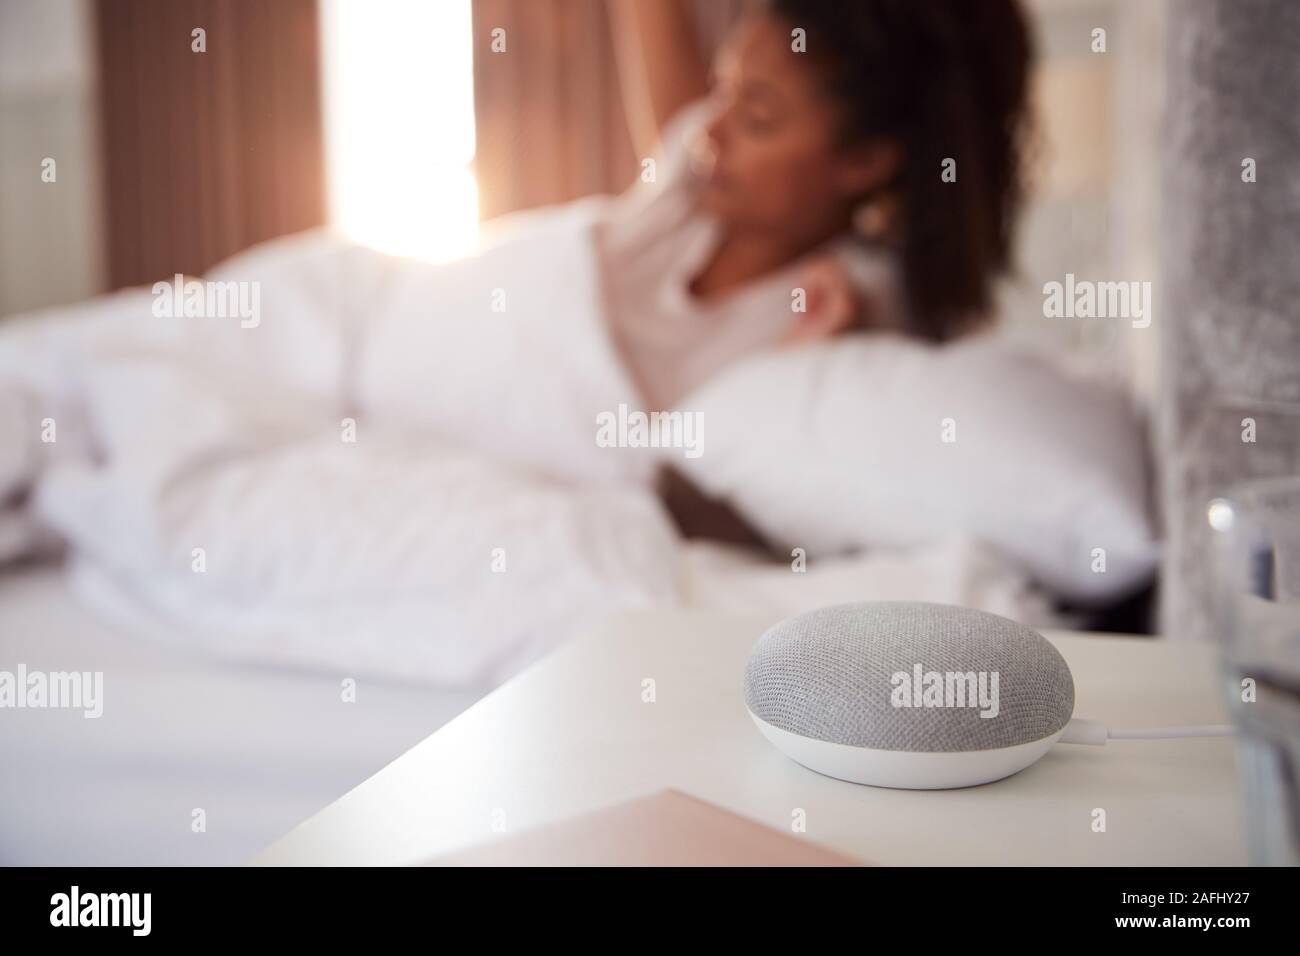 Woman Waking Up In Bed With Voice Assistant On Bedside Table Next To Her Stock Photo